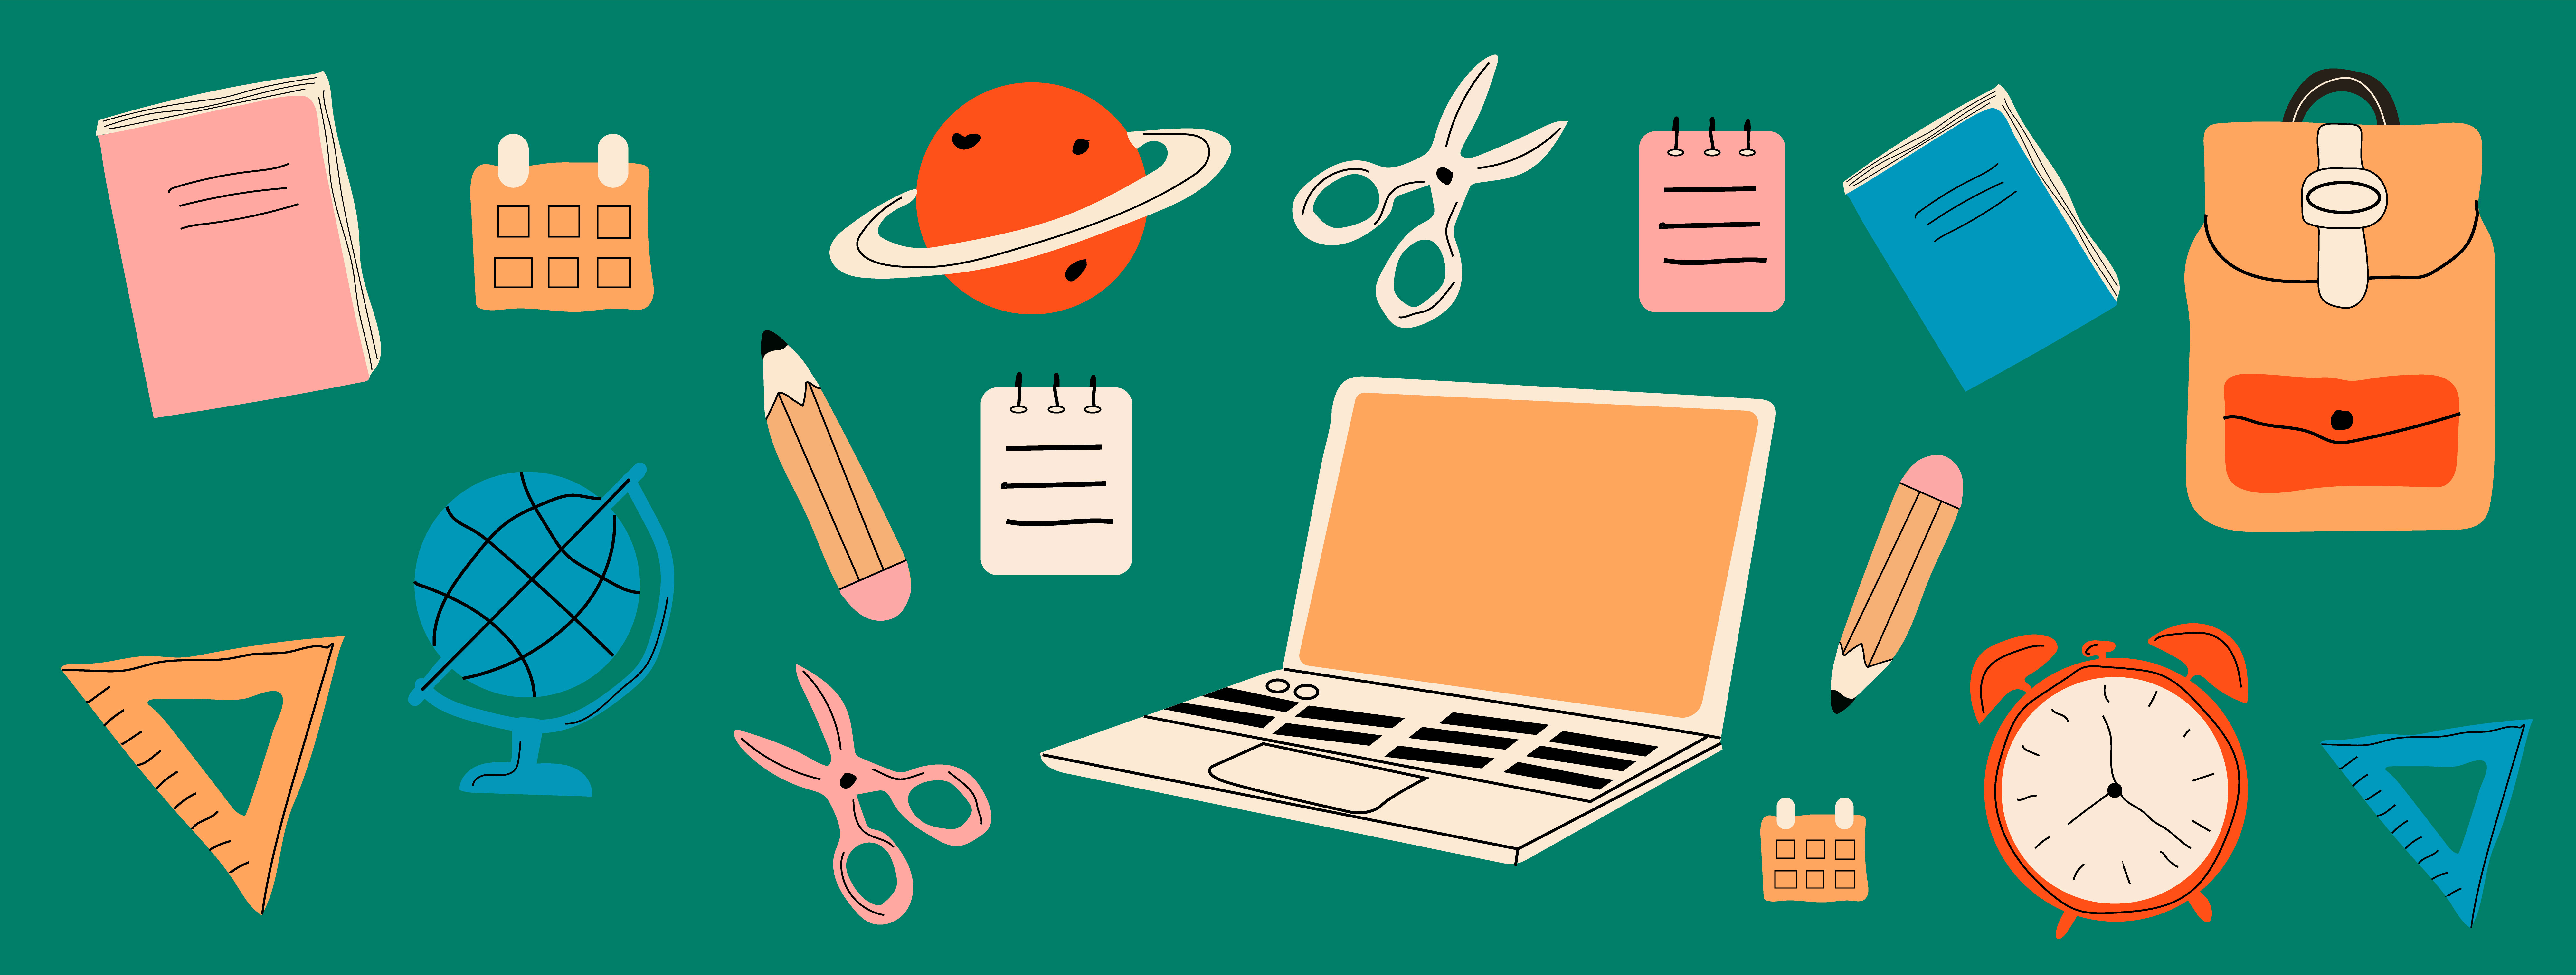 An illustration of school supplies: Notebooks, a globe, a laptop, scissors, a pencil, a clock, a planet, a calculator, and geometry tools.